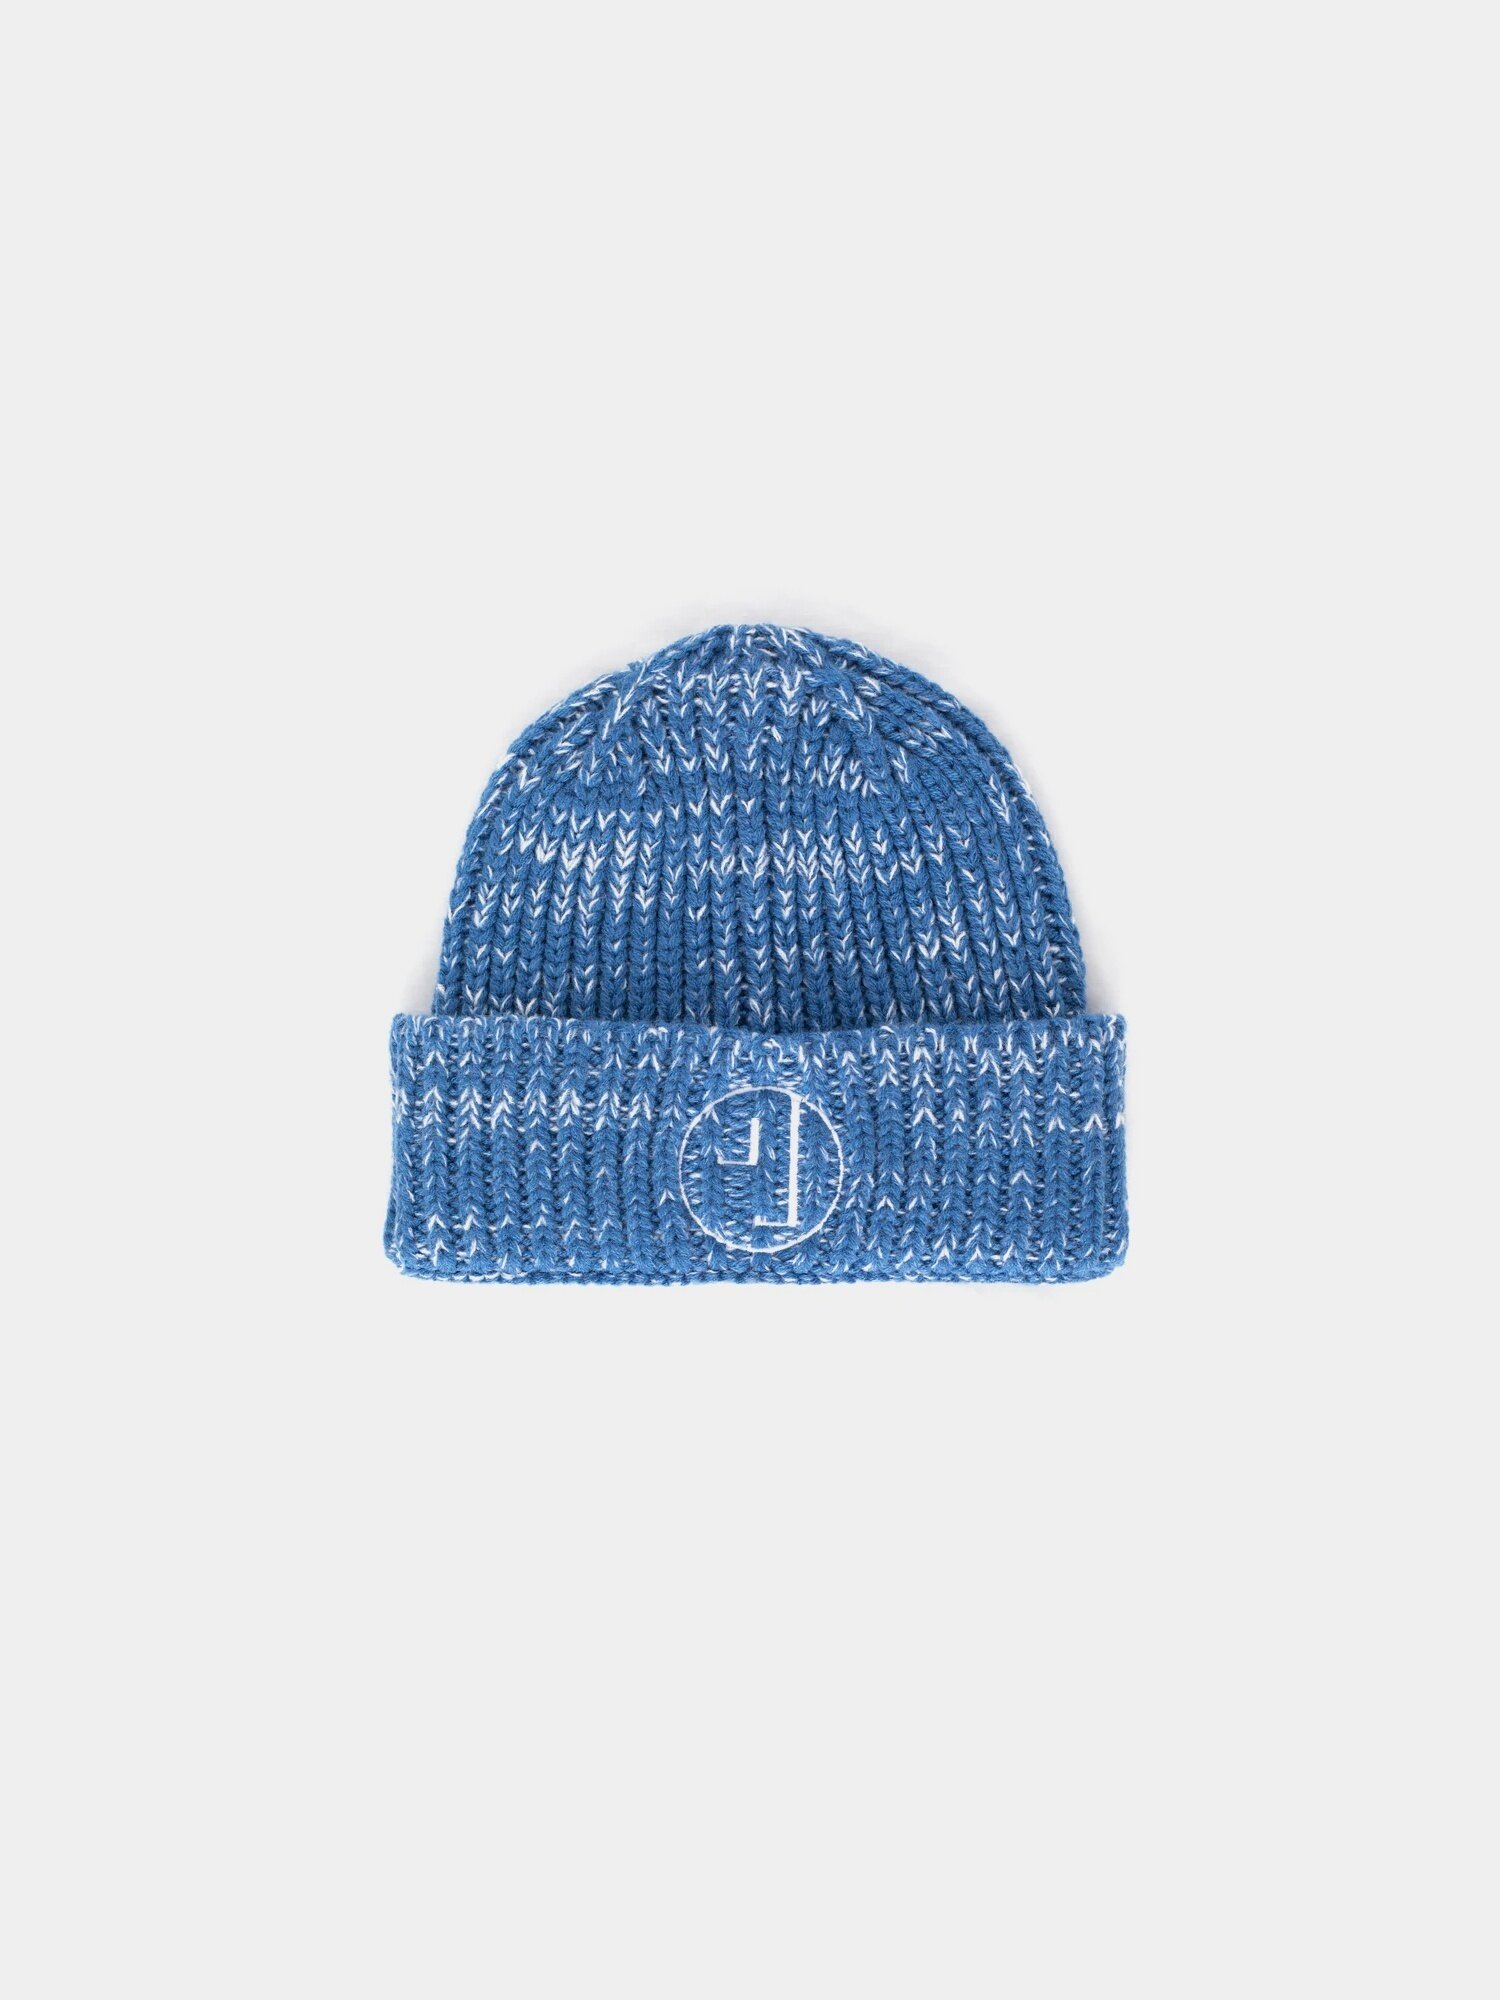 Шапка бини Jungles Jungles Blue Speckle Beanie